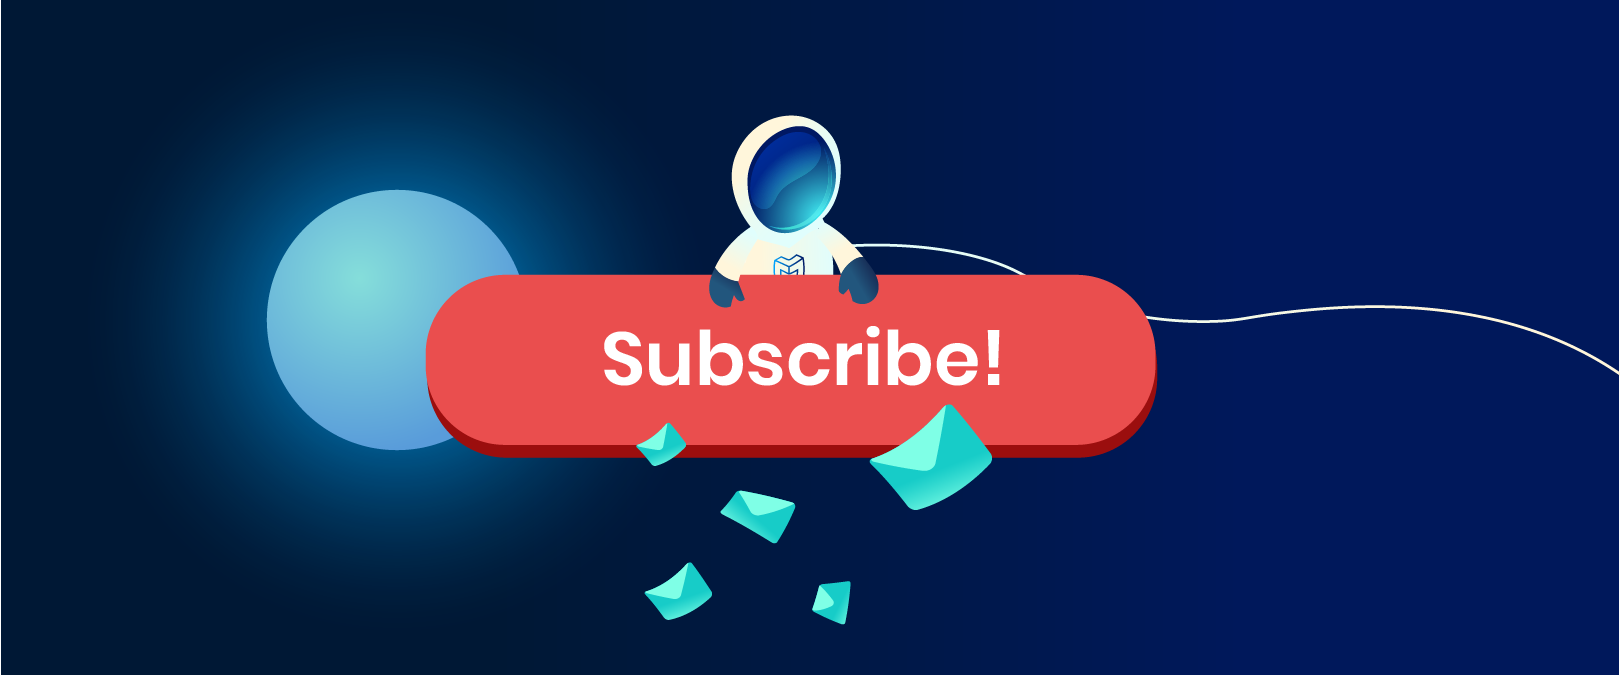 How to get more email list subscribers?